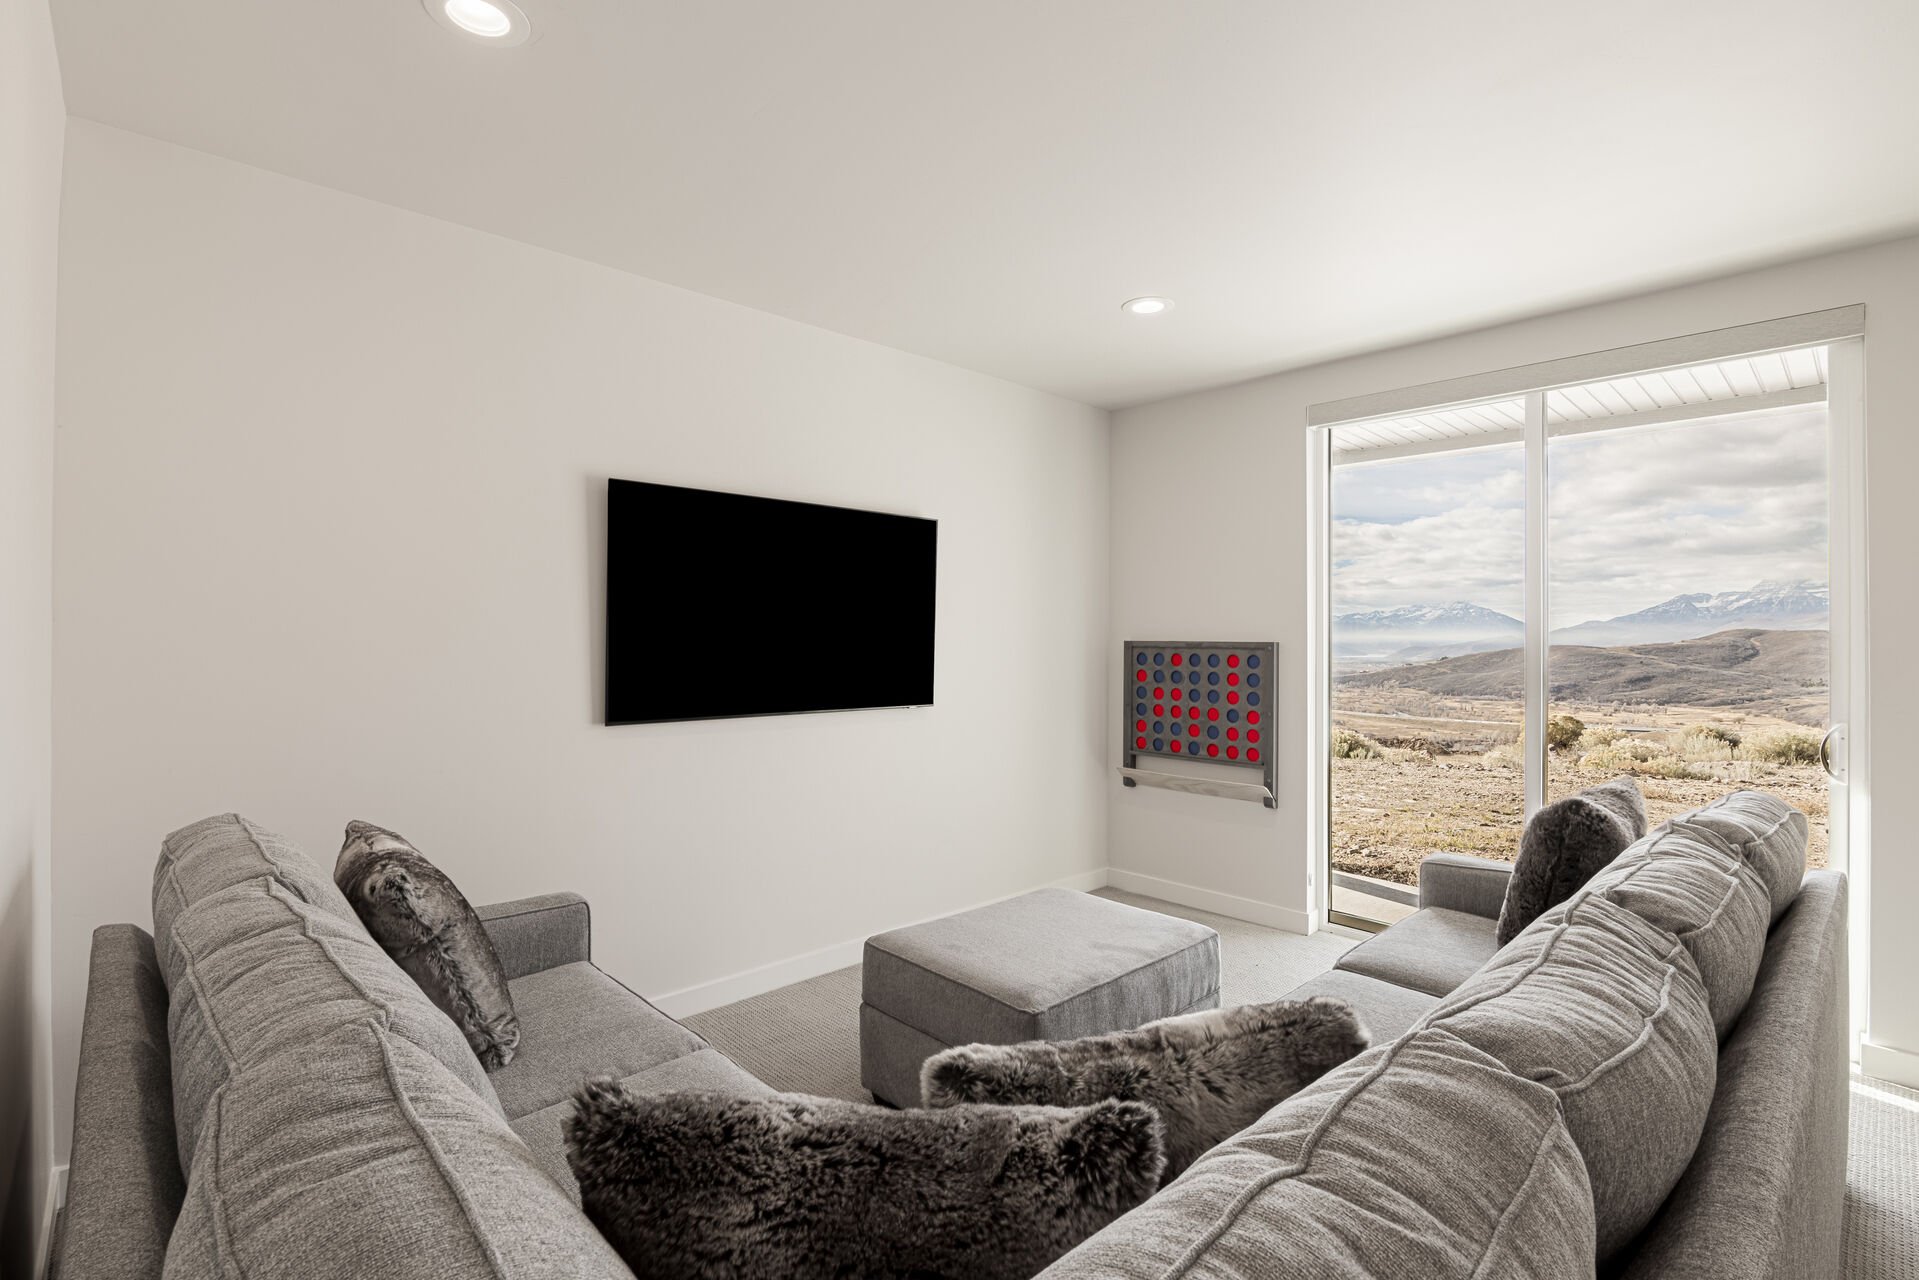 Lower level family room with a Smart TV and Connect 4 game